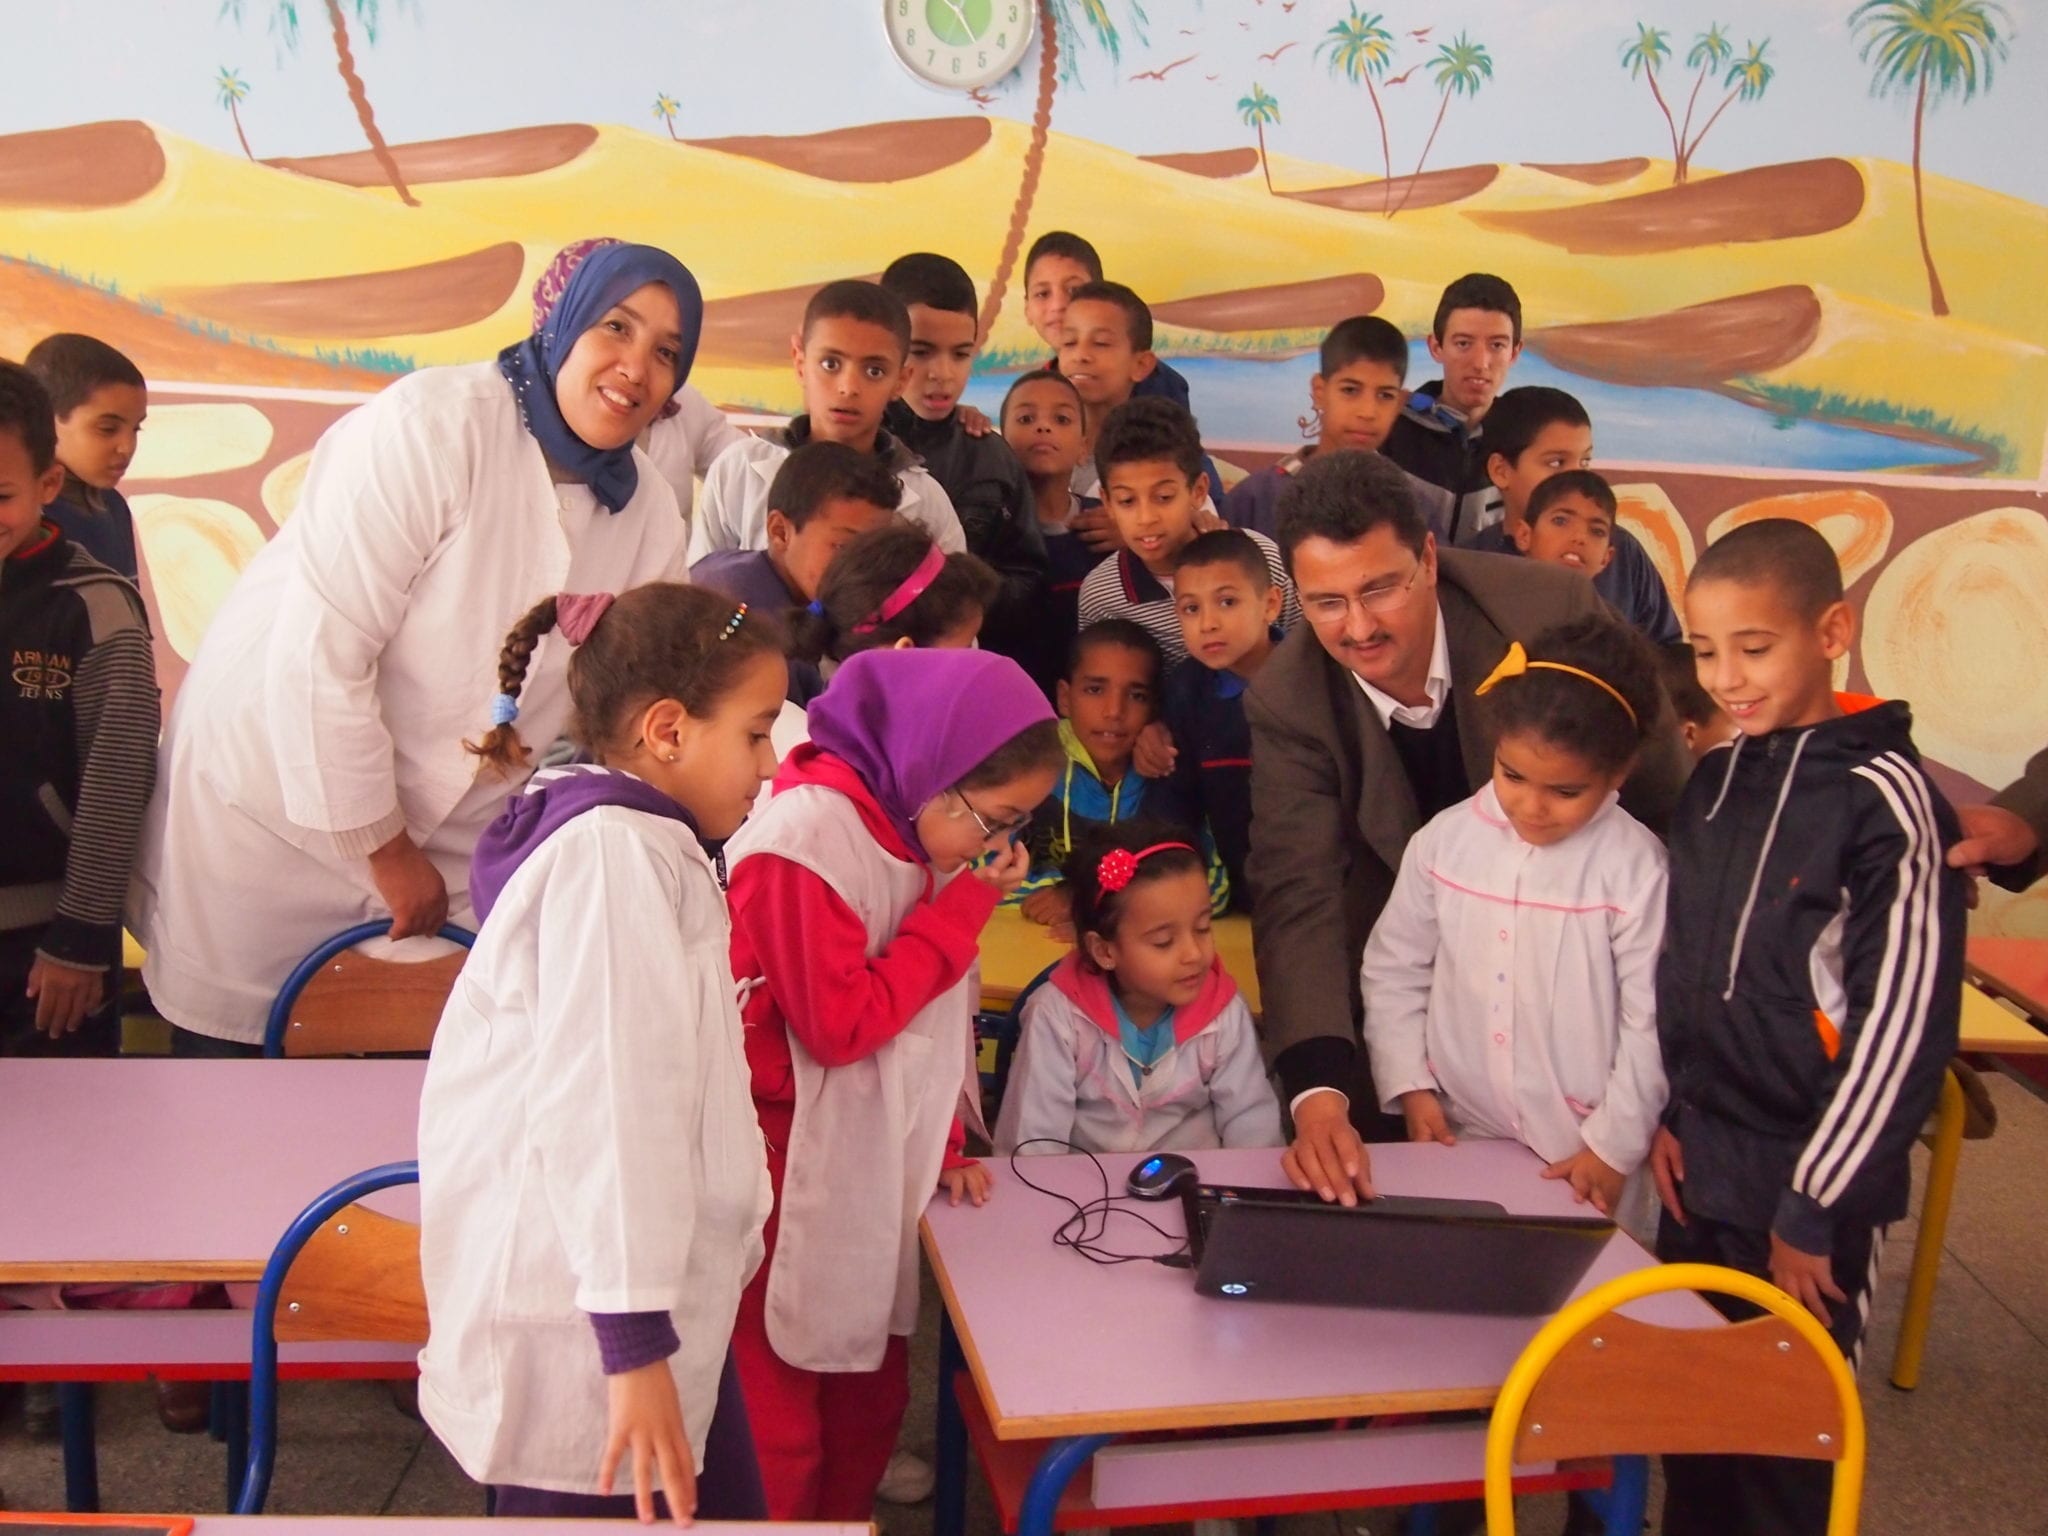 A group of children participate in Institute for Disabilities Training and Research deaf education project in Morocco.